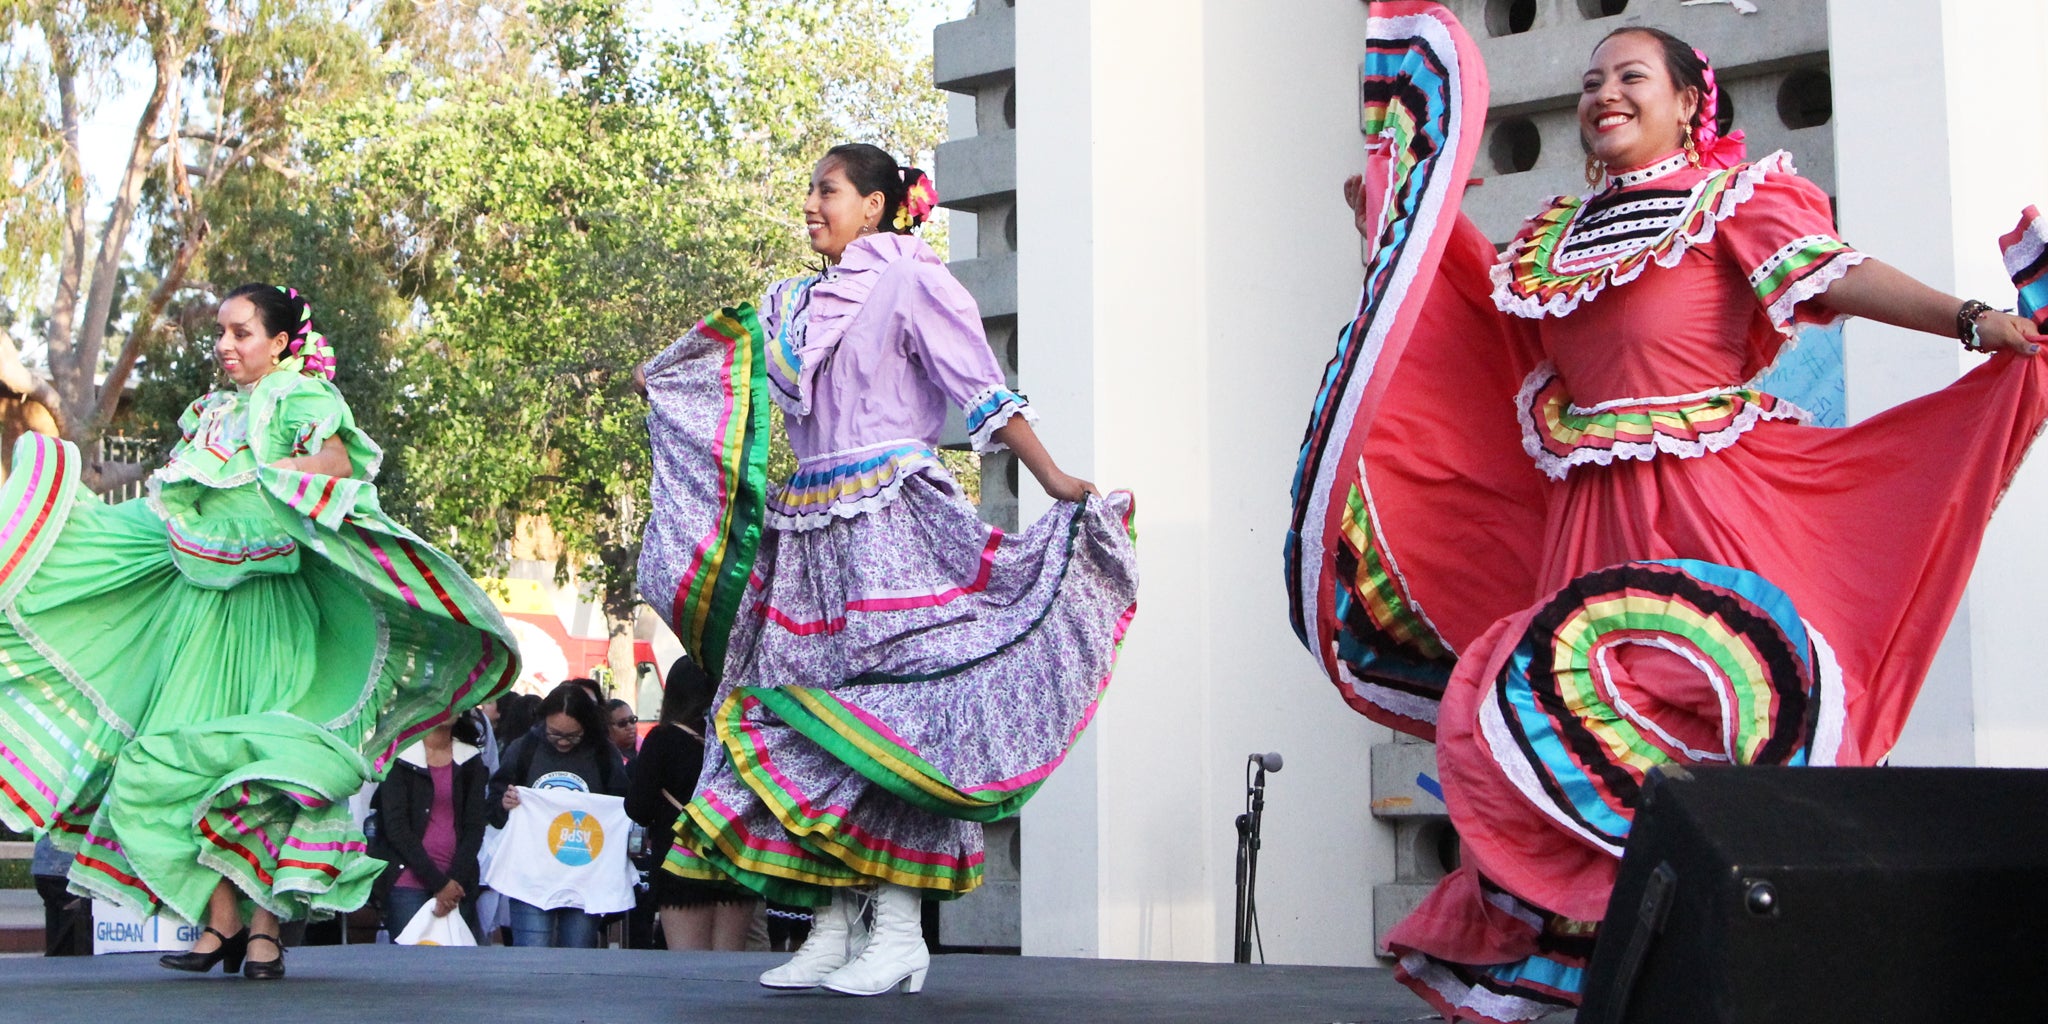 Ballet folklorico dancers perform at a campus event.